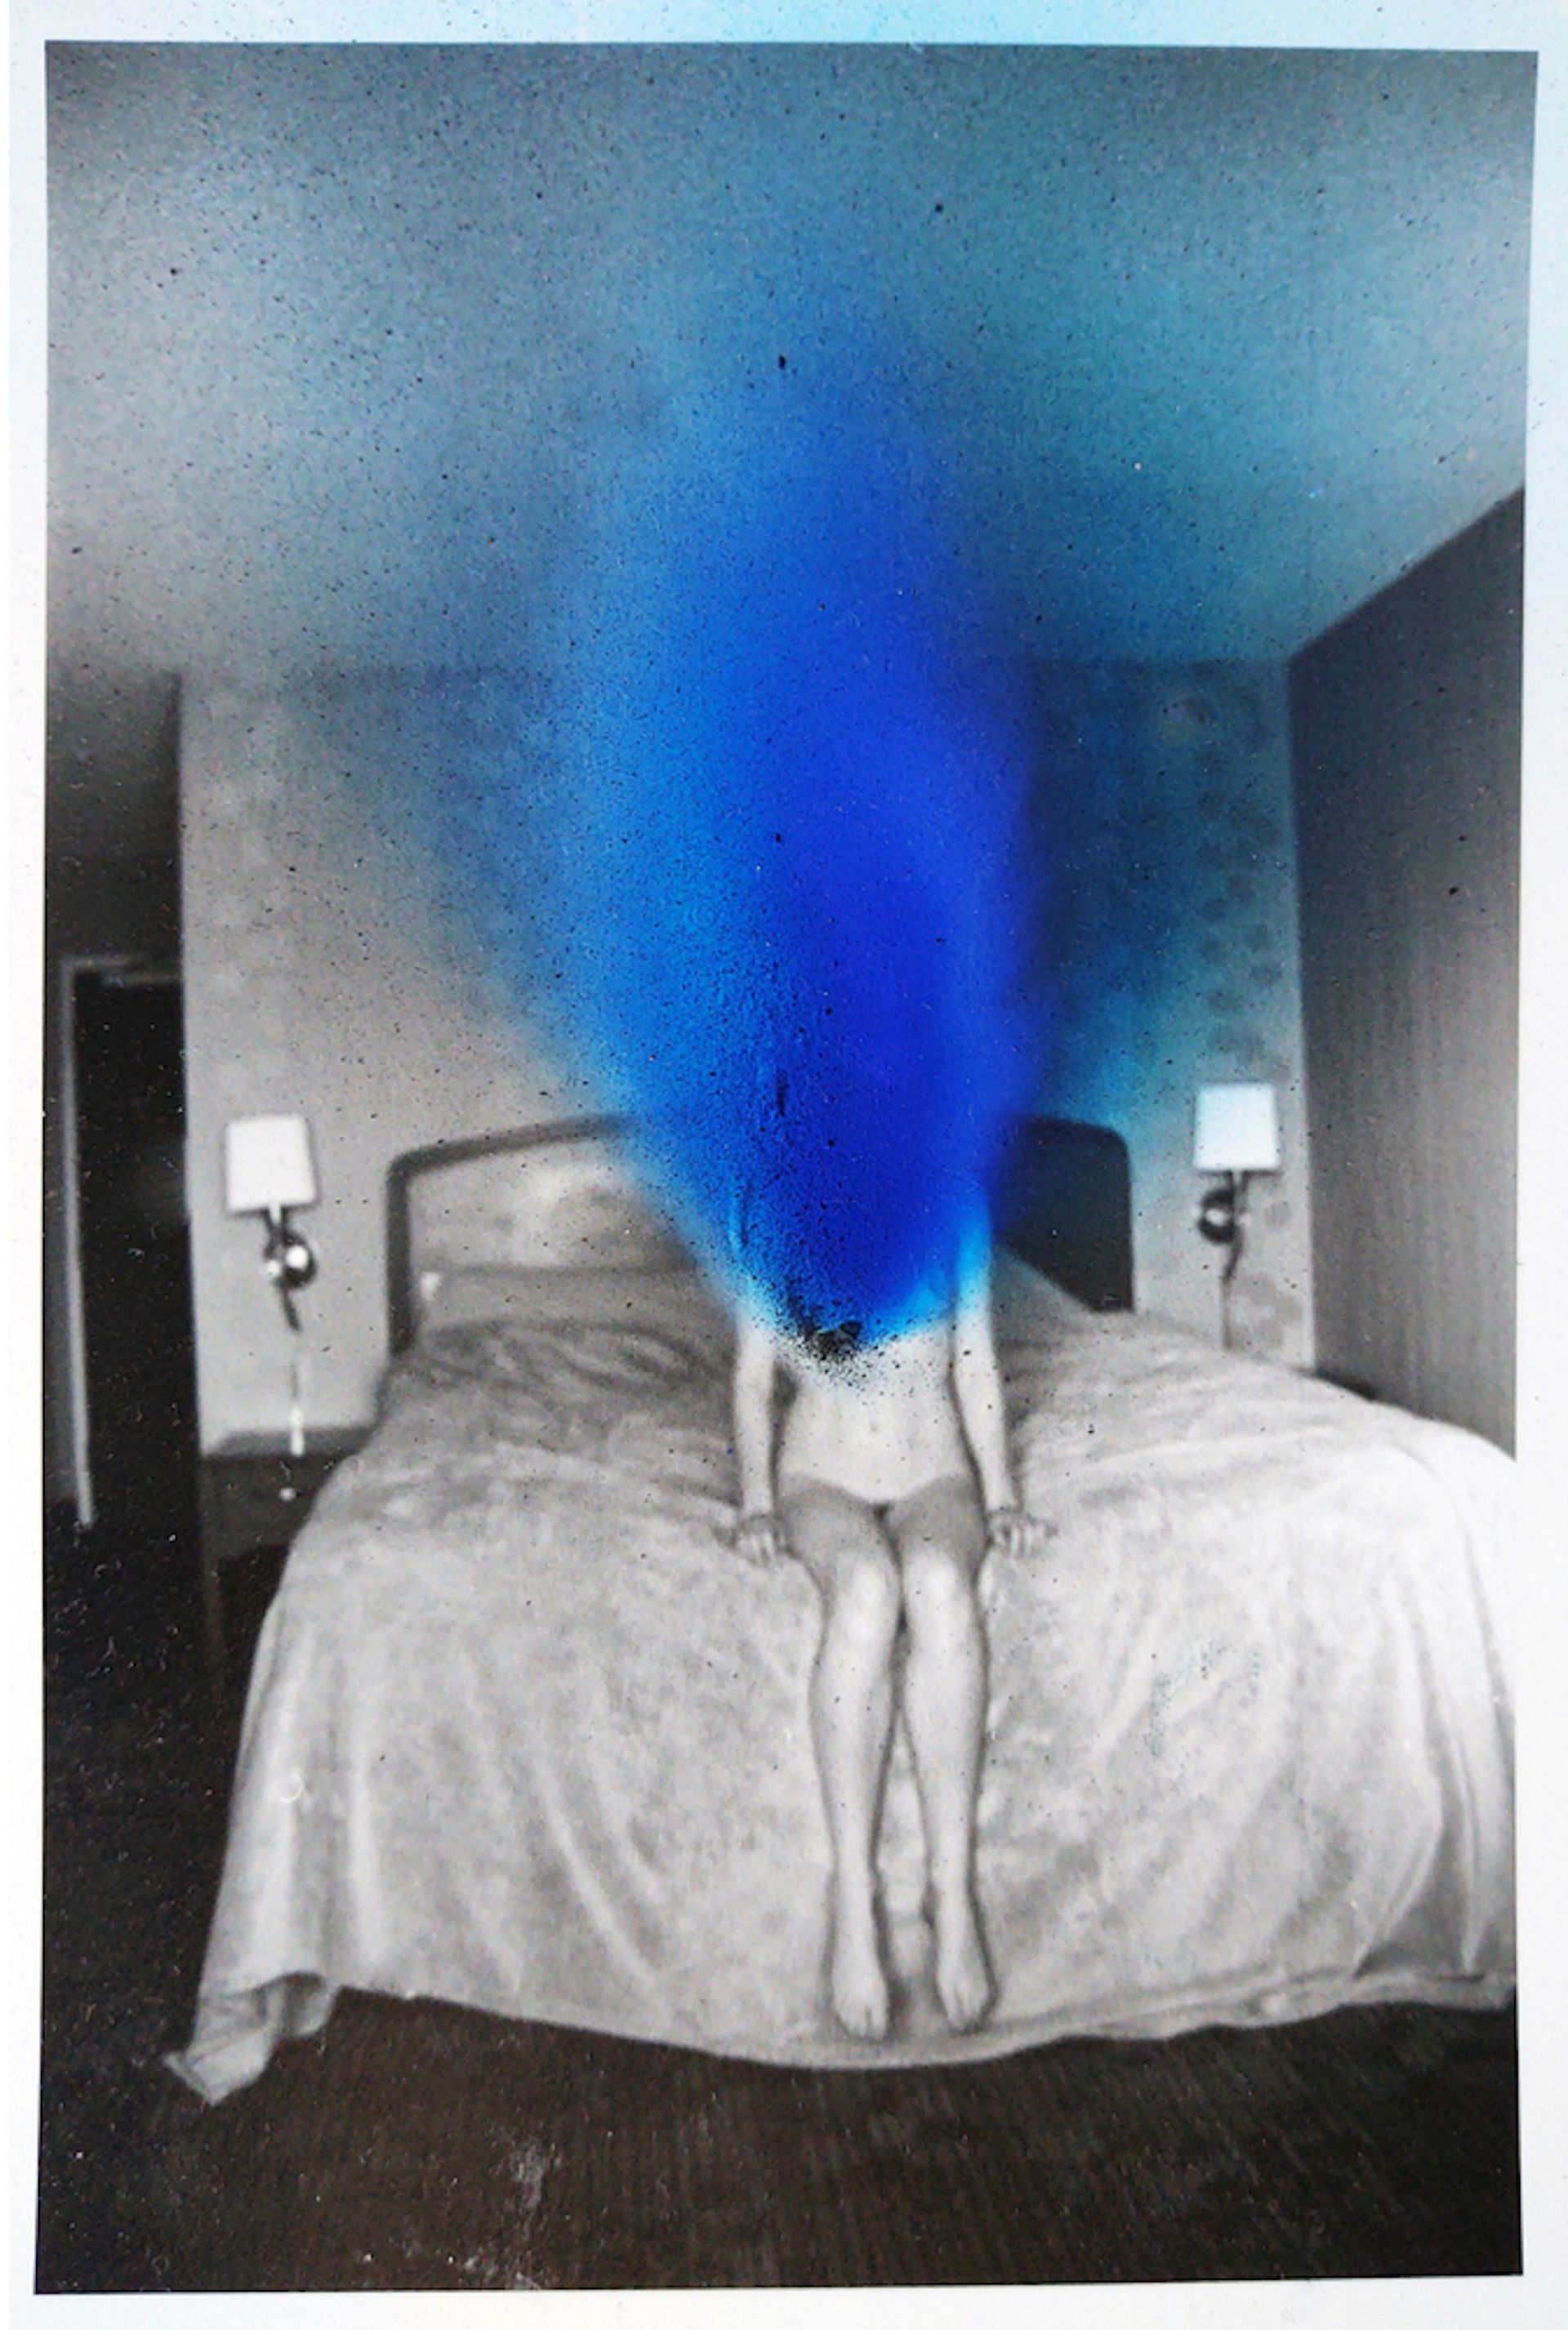 Jordanna Kalman's archival inkjet print june (2021) was featured on her website at the time Stripe terminated her account for "pornography" Courtesy of the artist